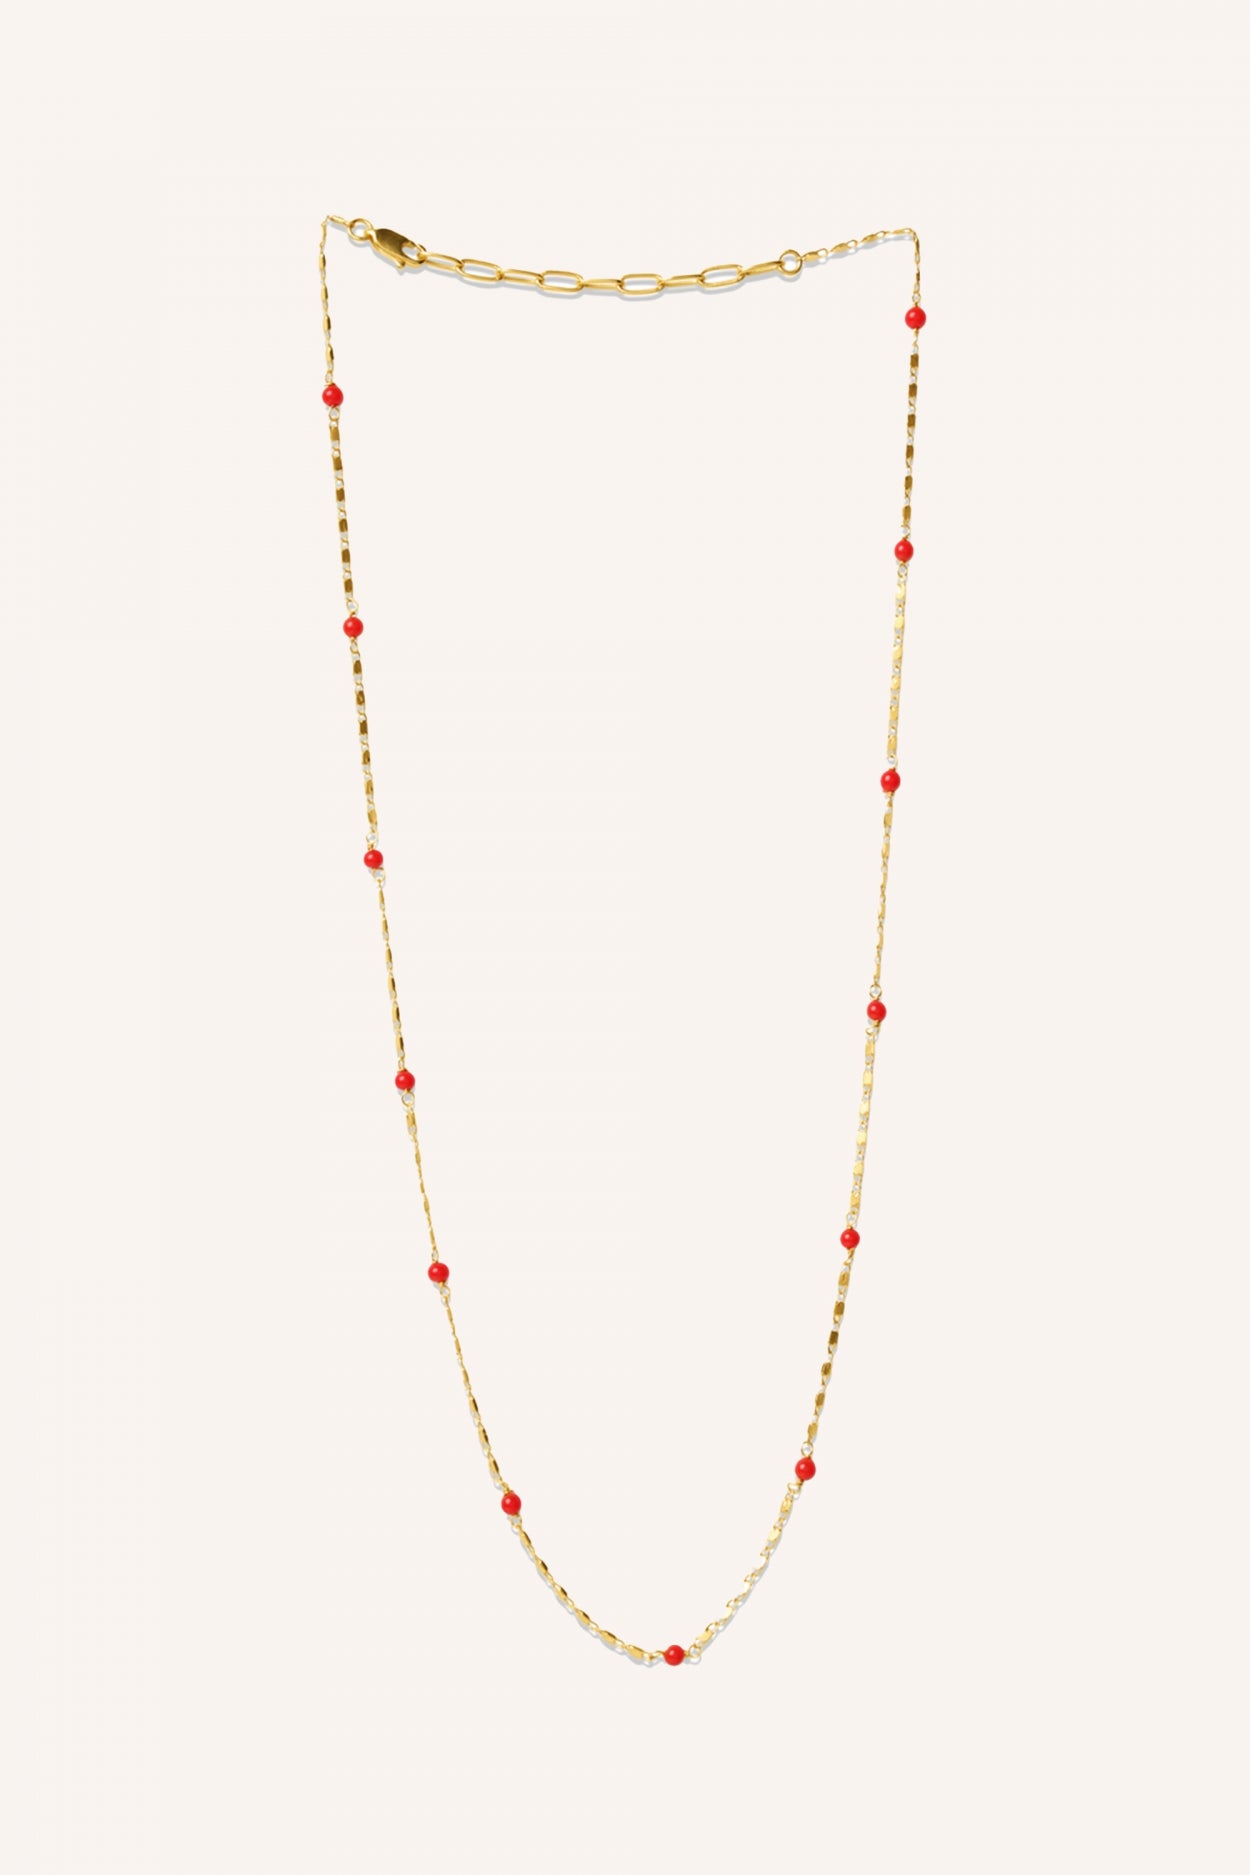 mees necklace | candy red